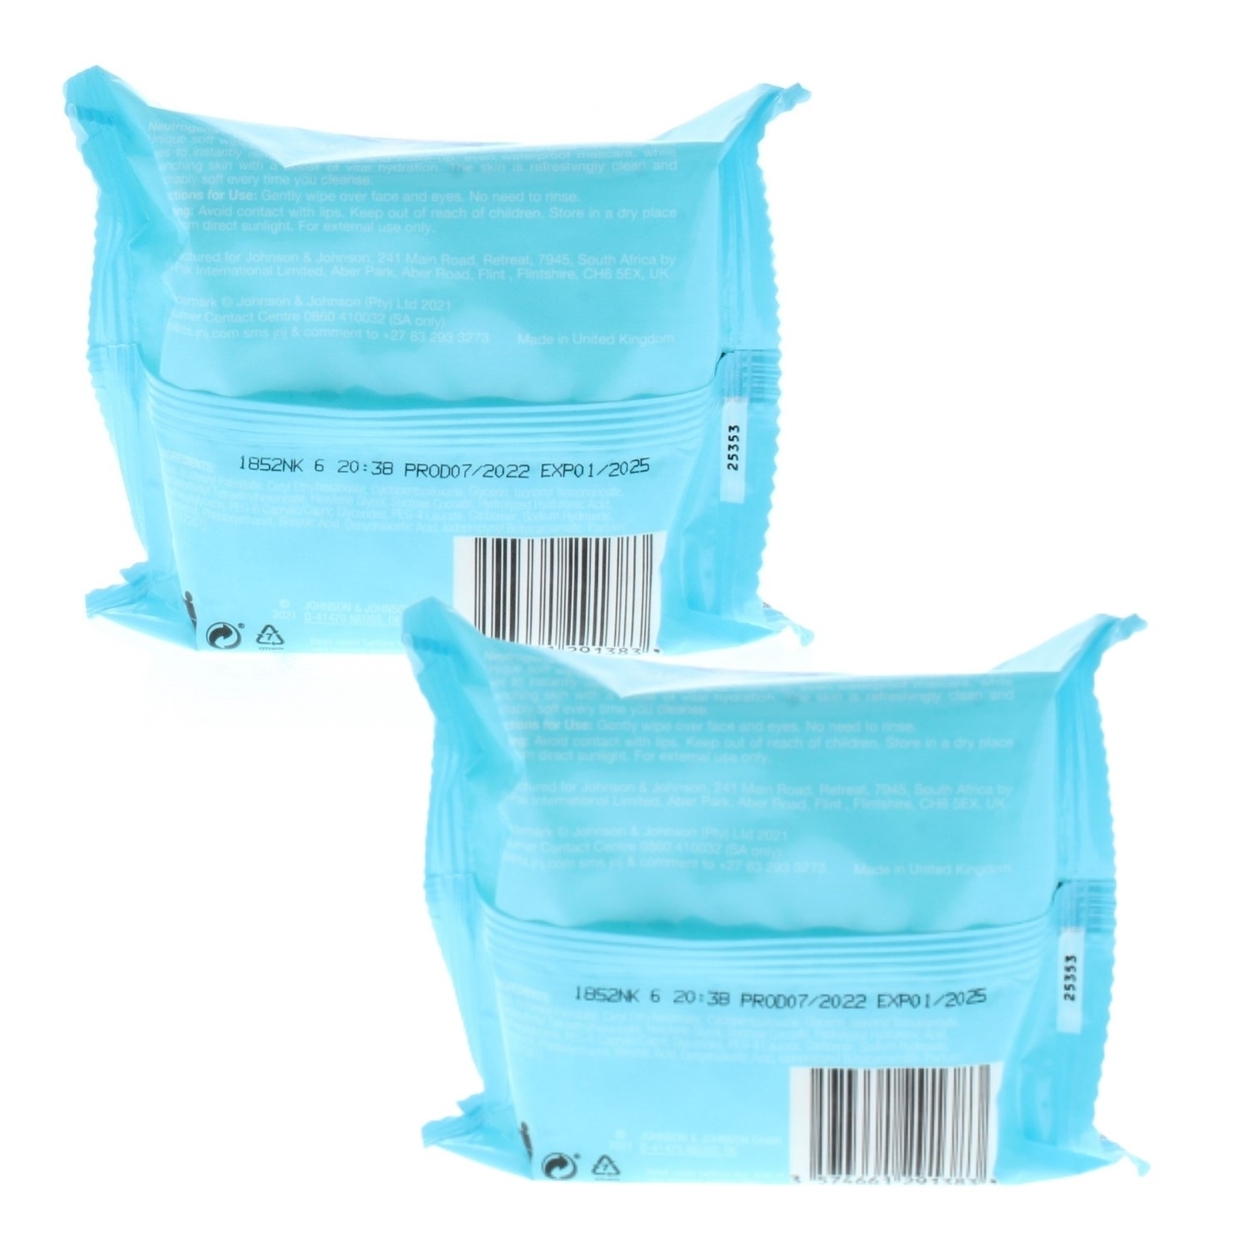 Neutrogena Hydro Boost Cleanser Facial Wipes (2 Packs Of 25 Wipes- Total 50 Wipes)